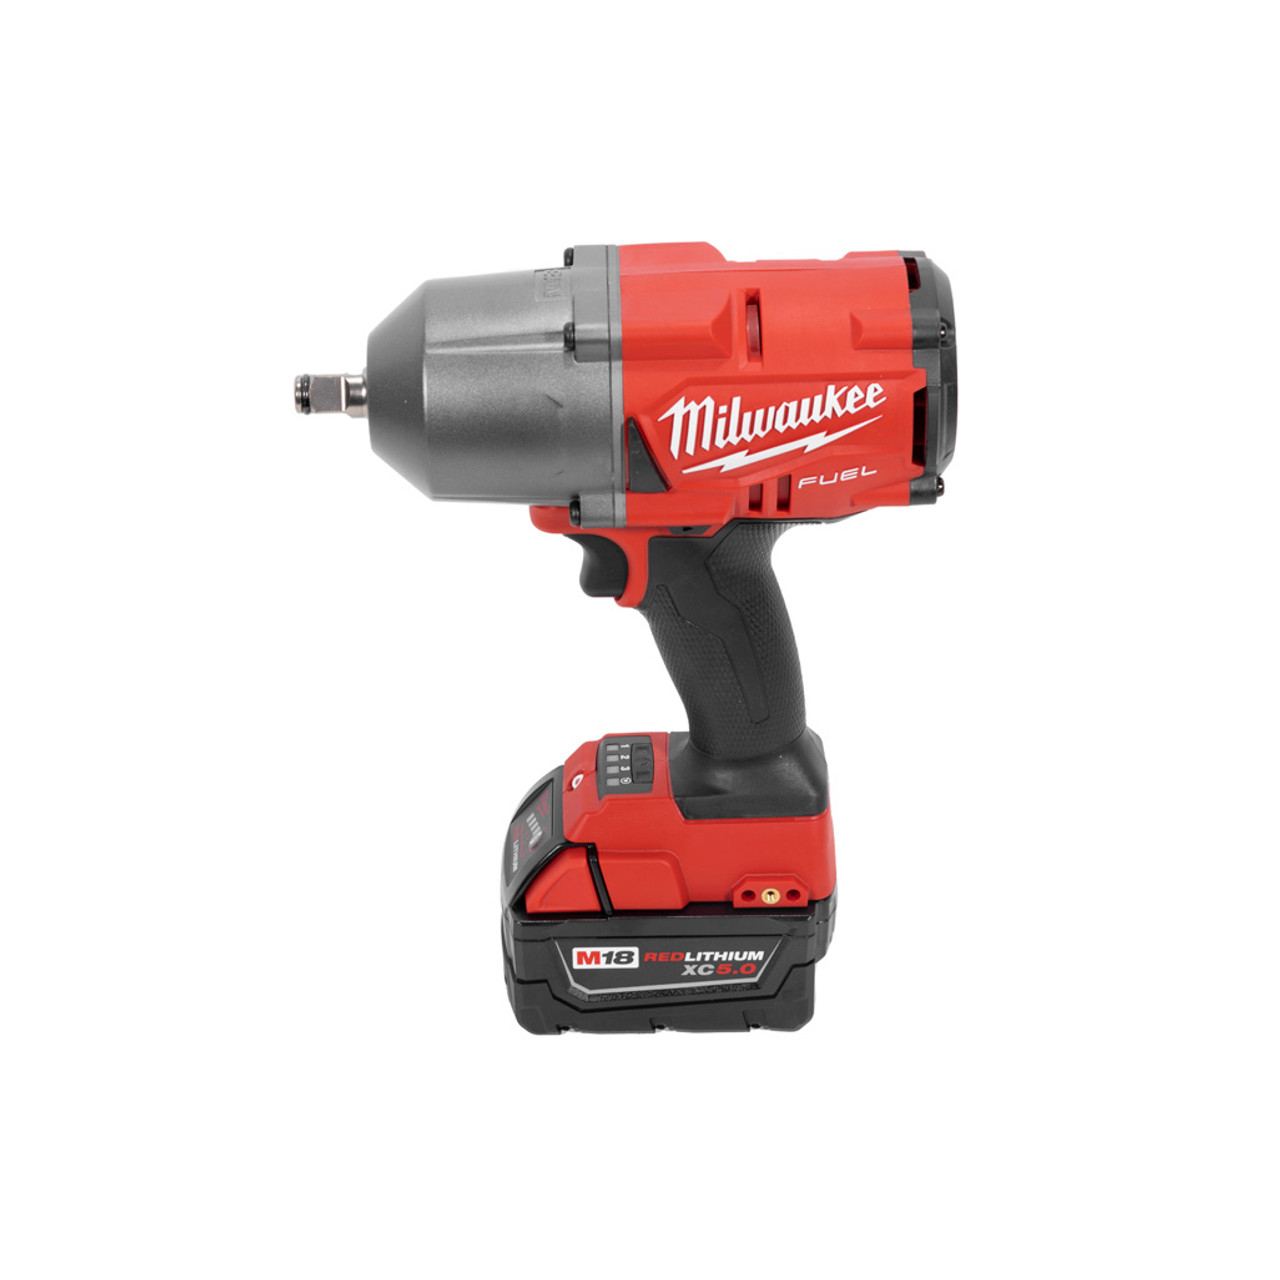 Milwaukee 2552-22 M12 FUEL Brushless Lithium-Ion in. Cordless Stubby Impact Wrench Kit with (1) Ah and (1) Ah Batteries - 2